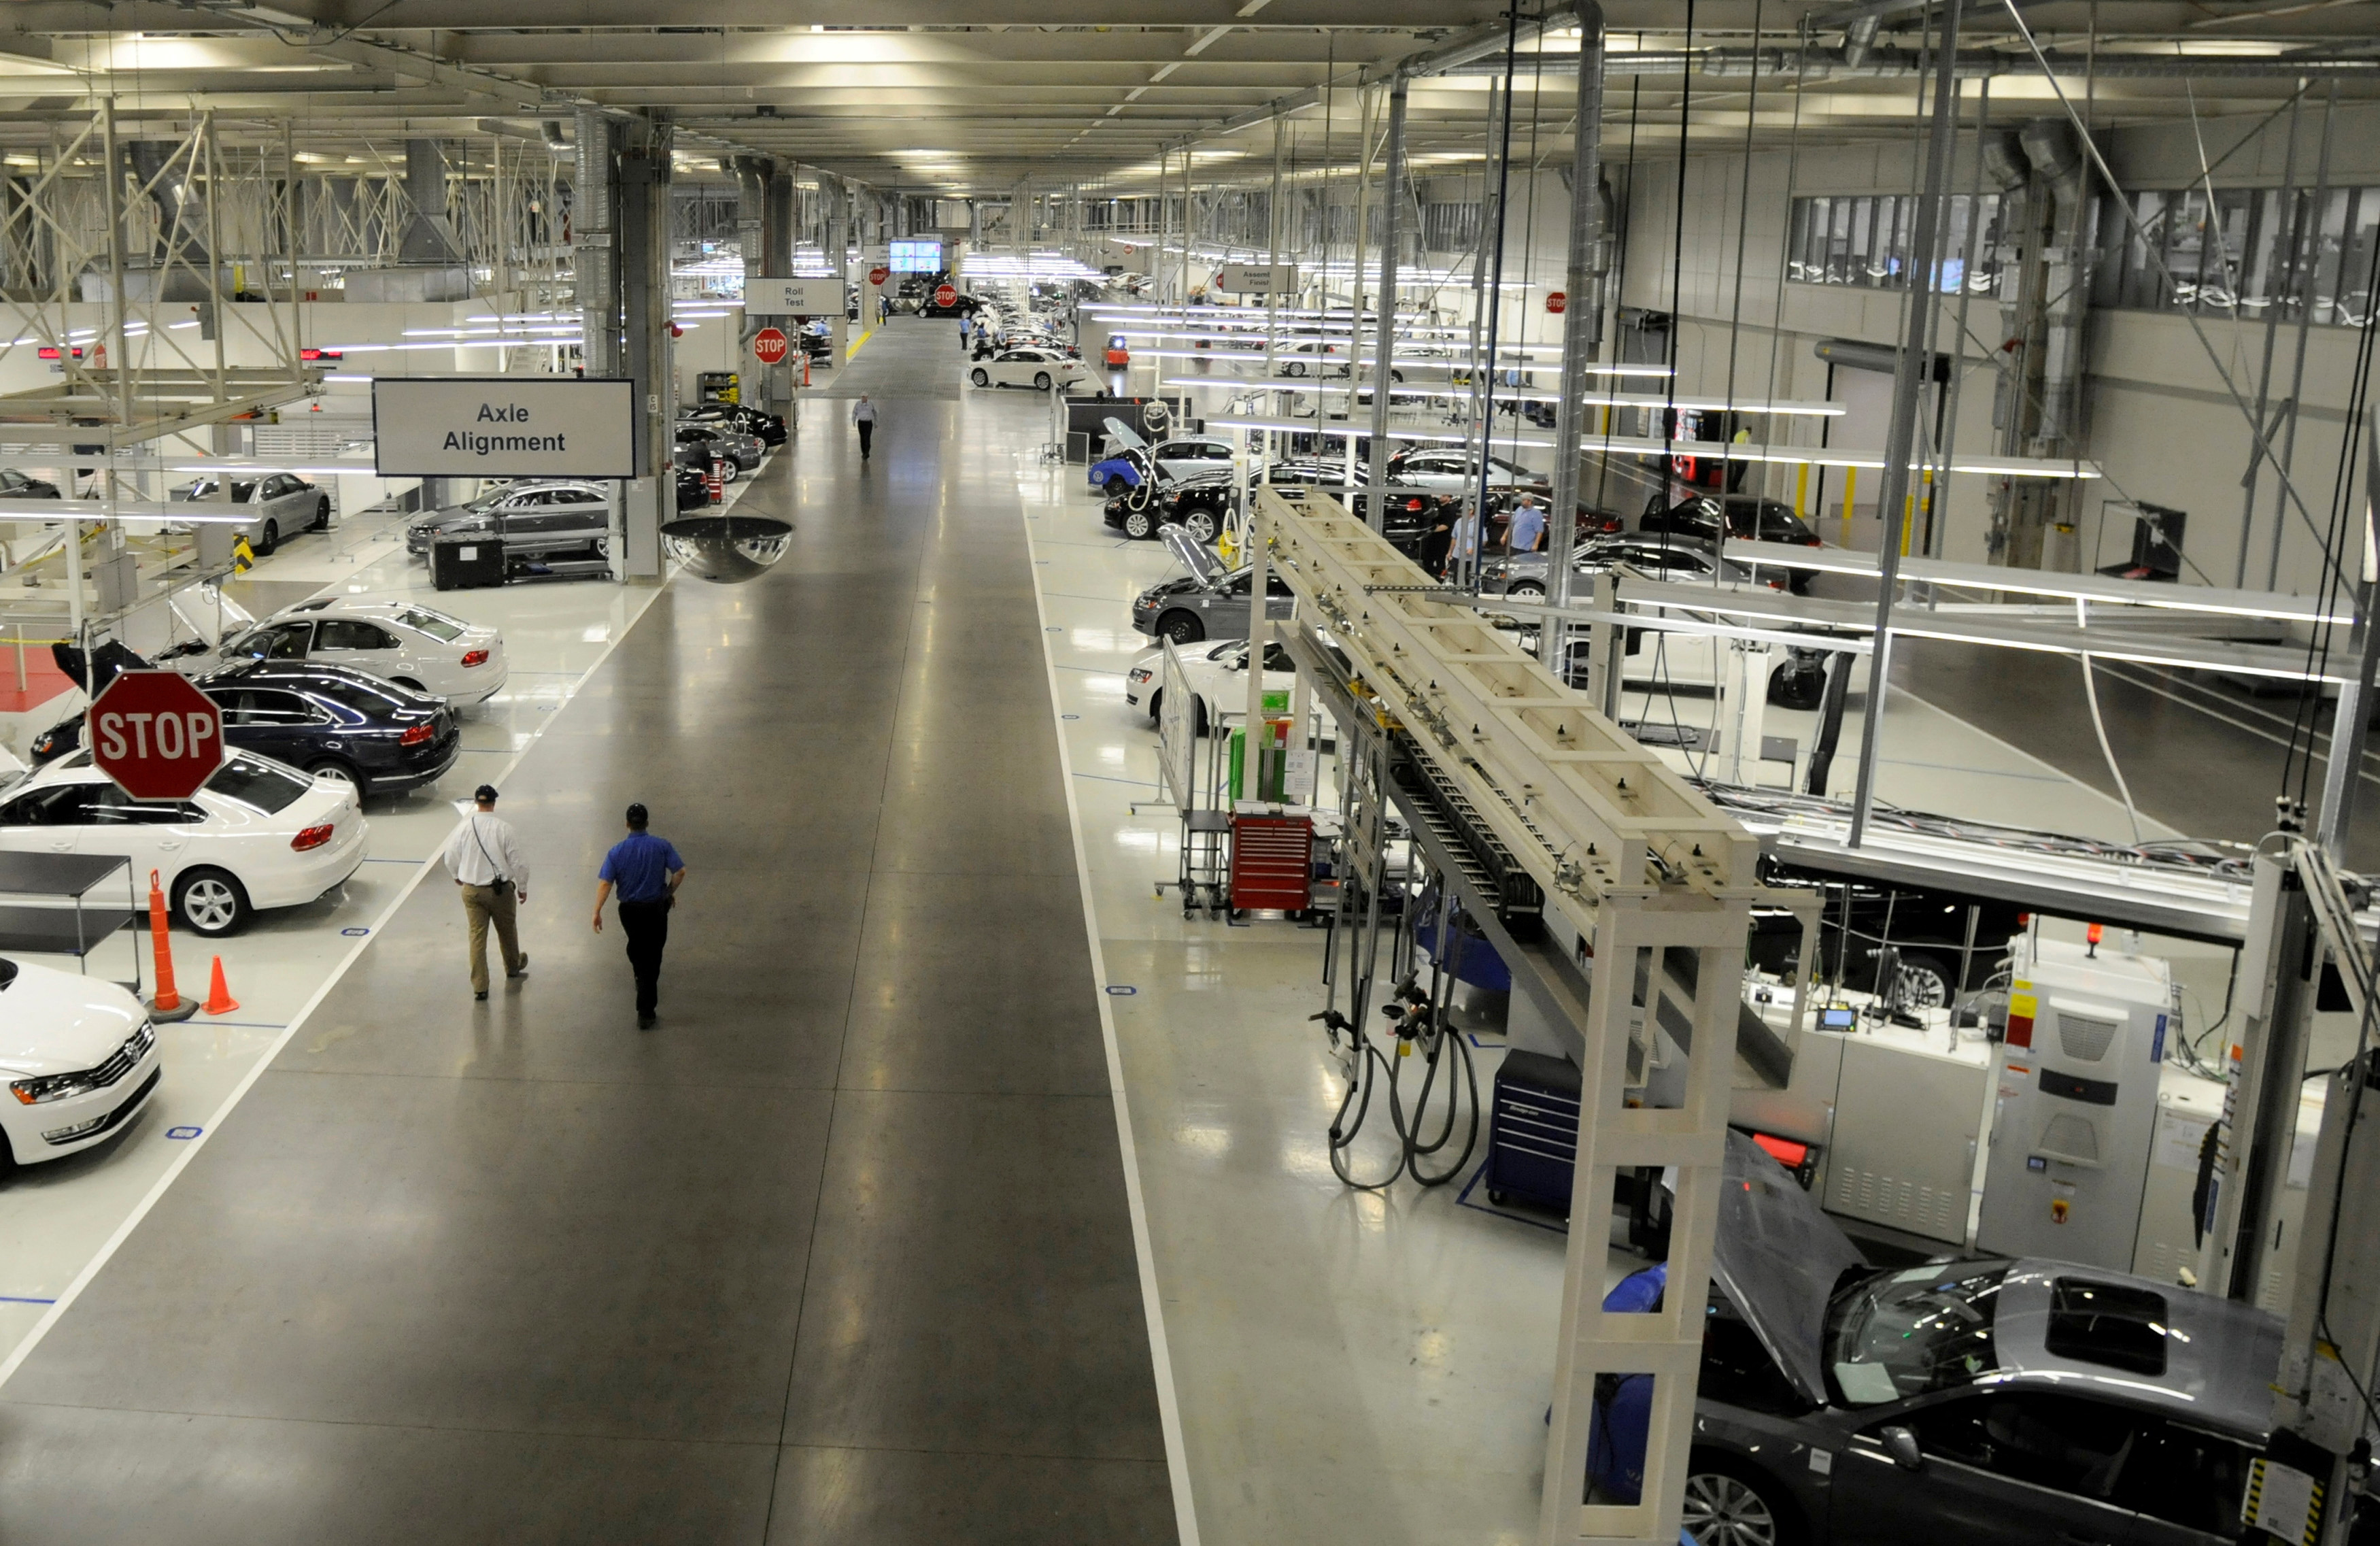 Two Volkswagen employees walk through the axle alignment department in Chattanooga Tennessee